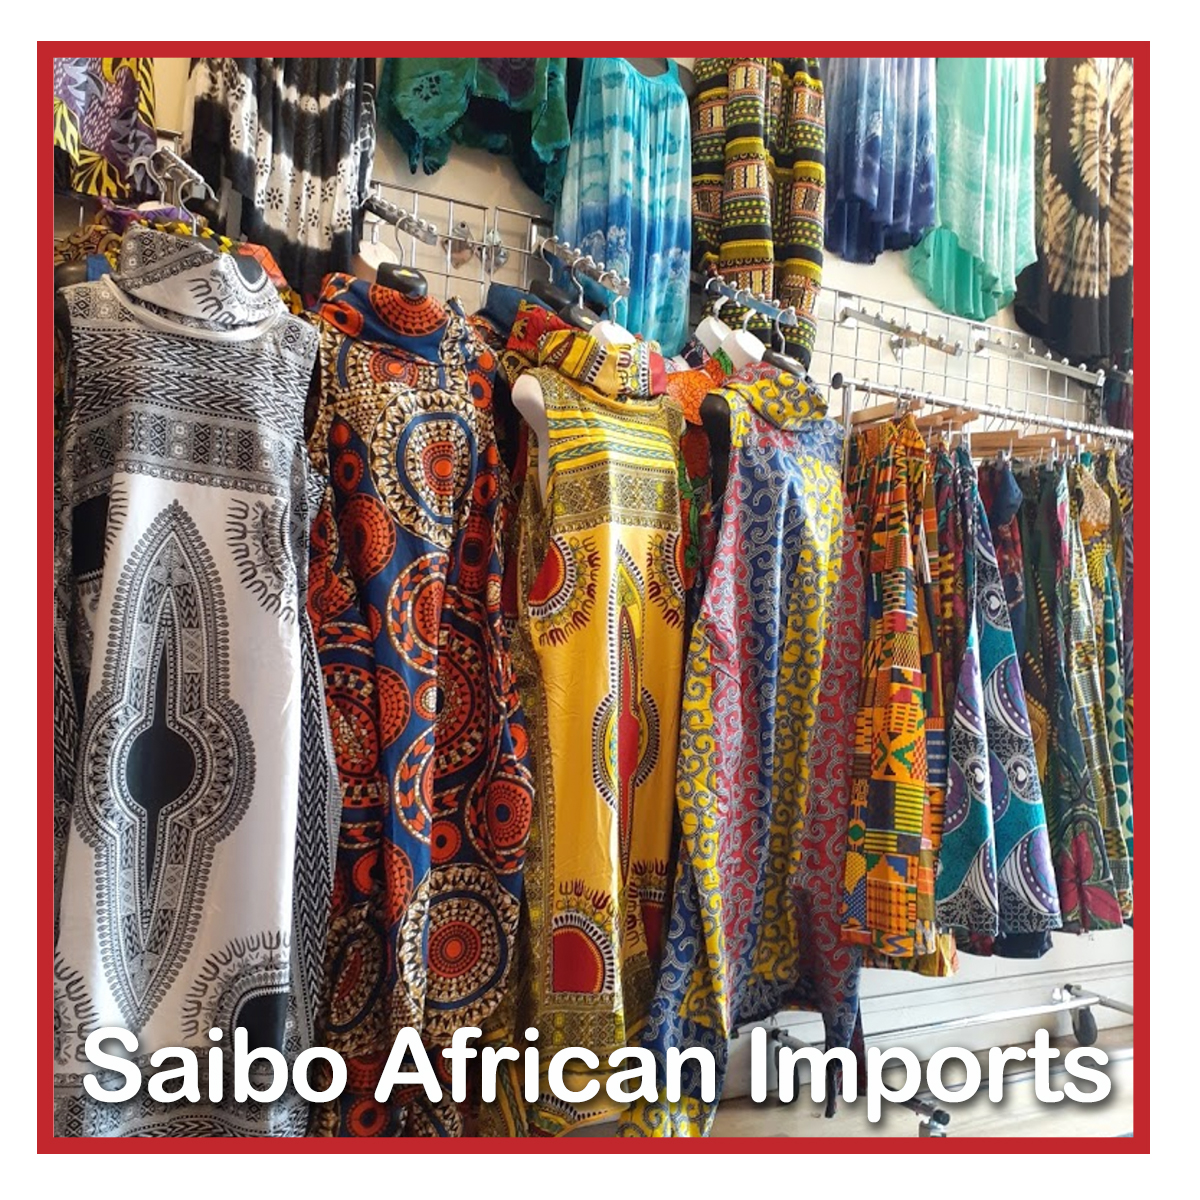 Read more about the article Saibo African Imports